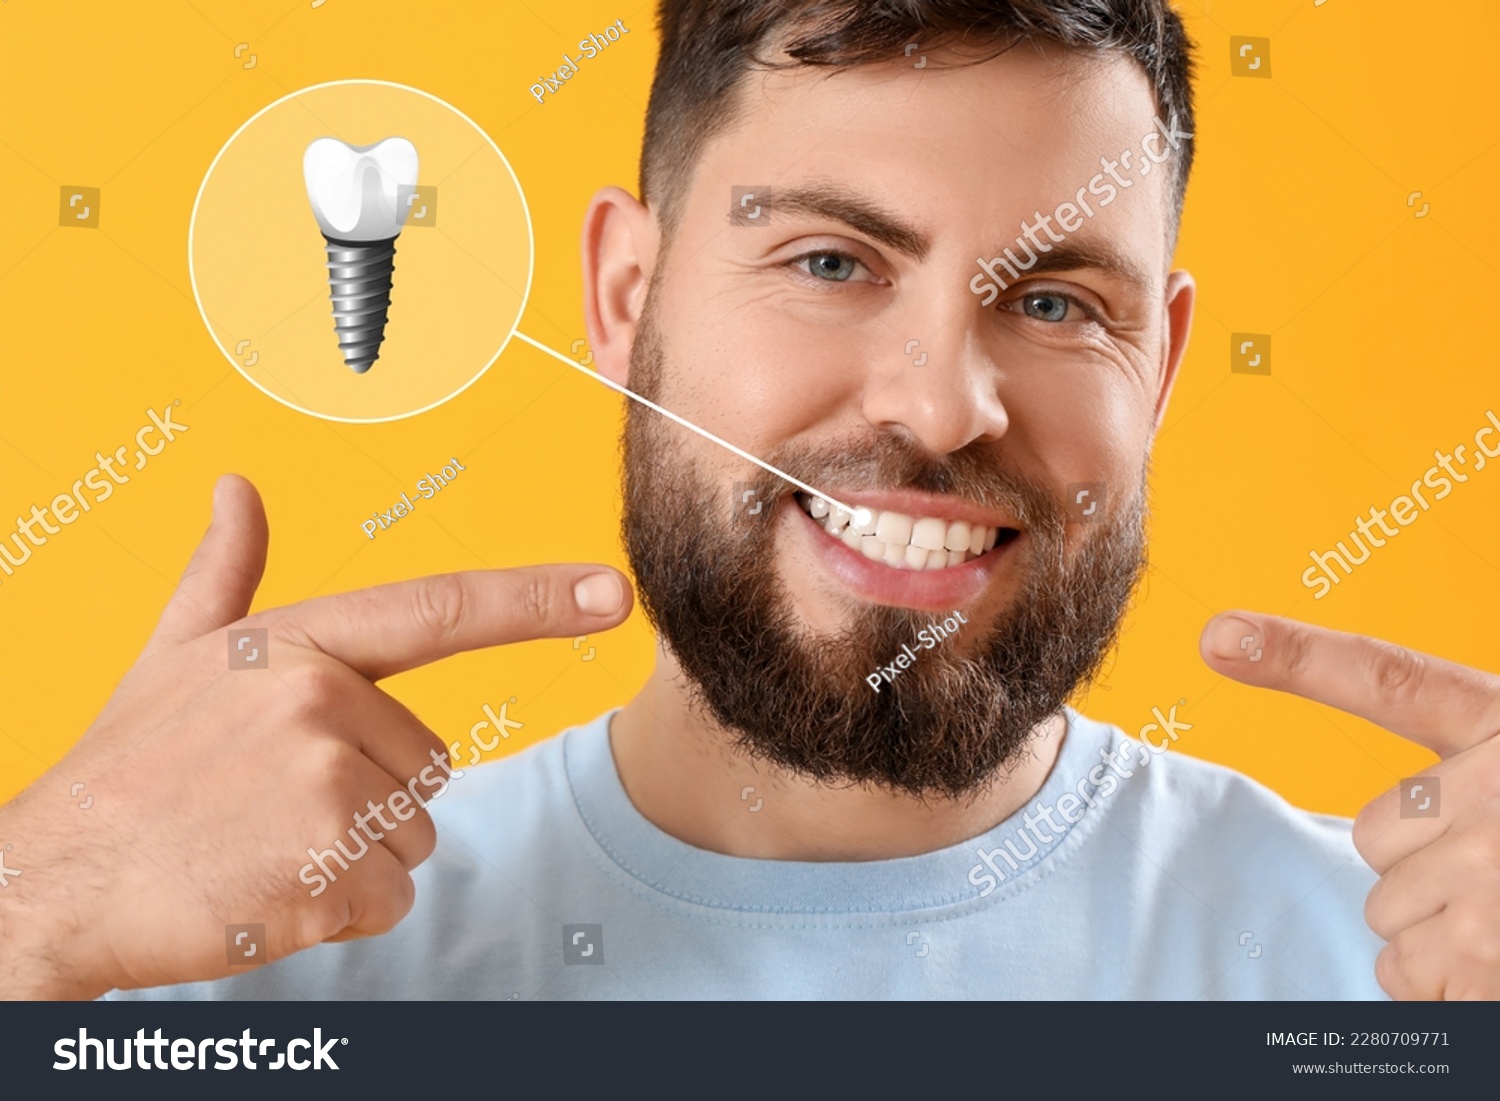 Young man with implanted teeth on yellow background #2280709771